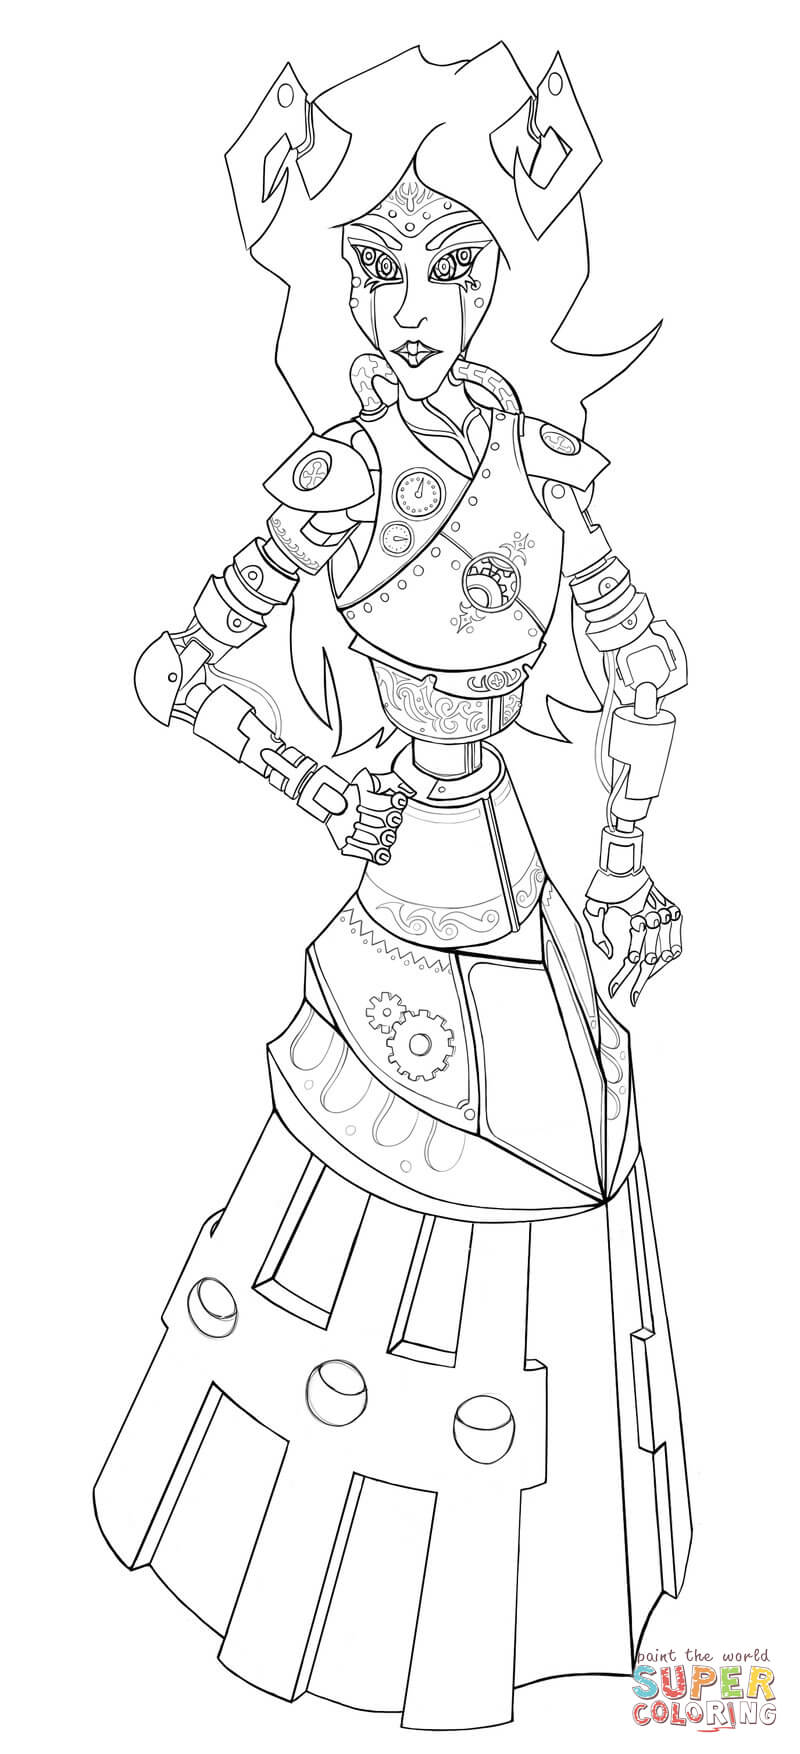 Steampunk aradiabot coloring page free printable coloring pages